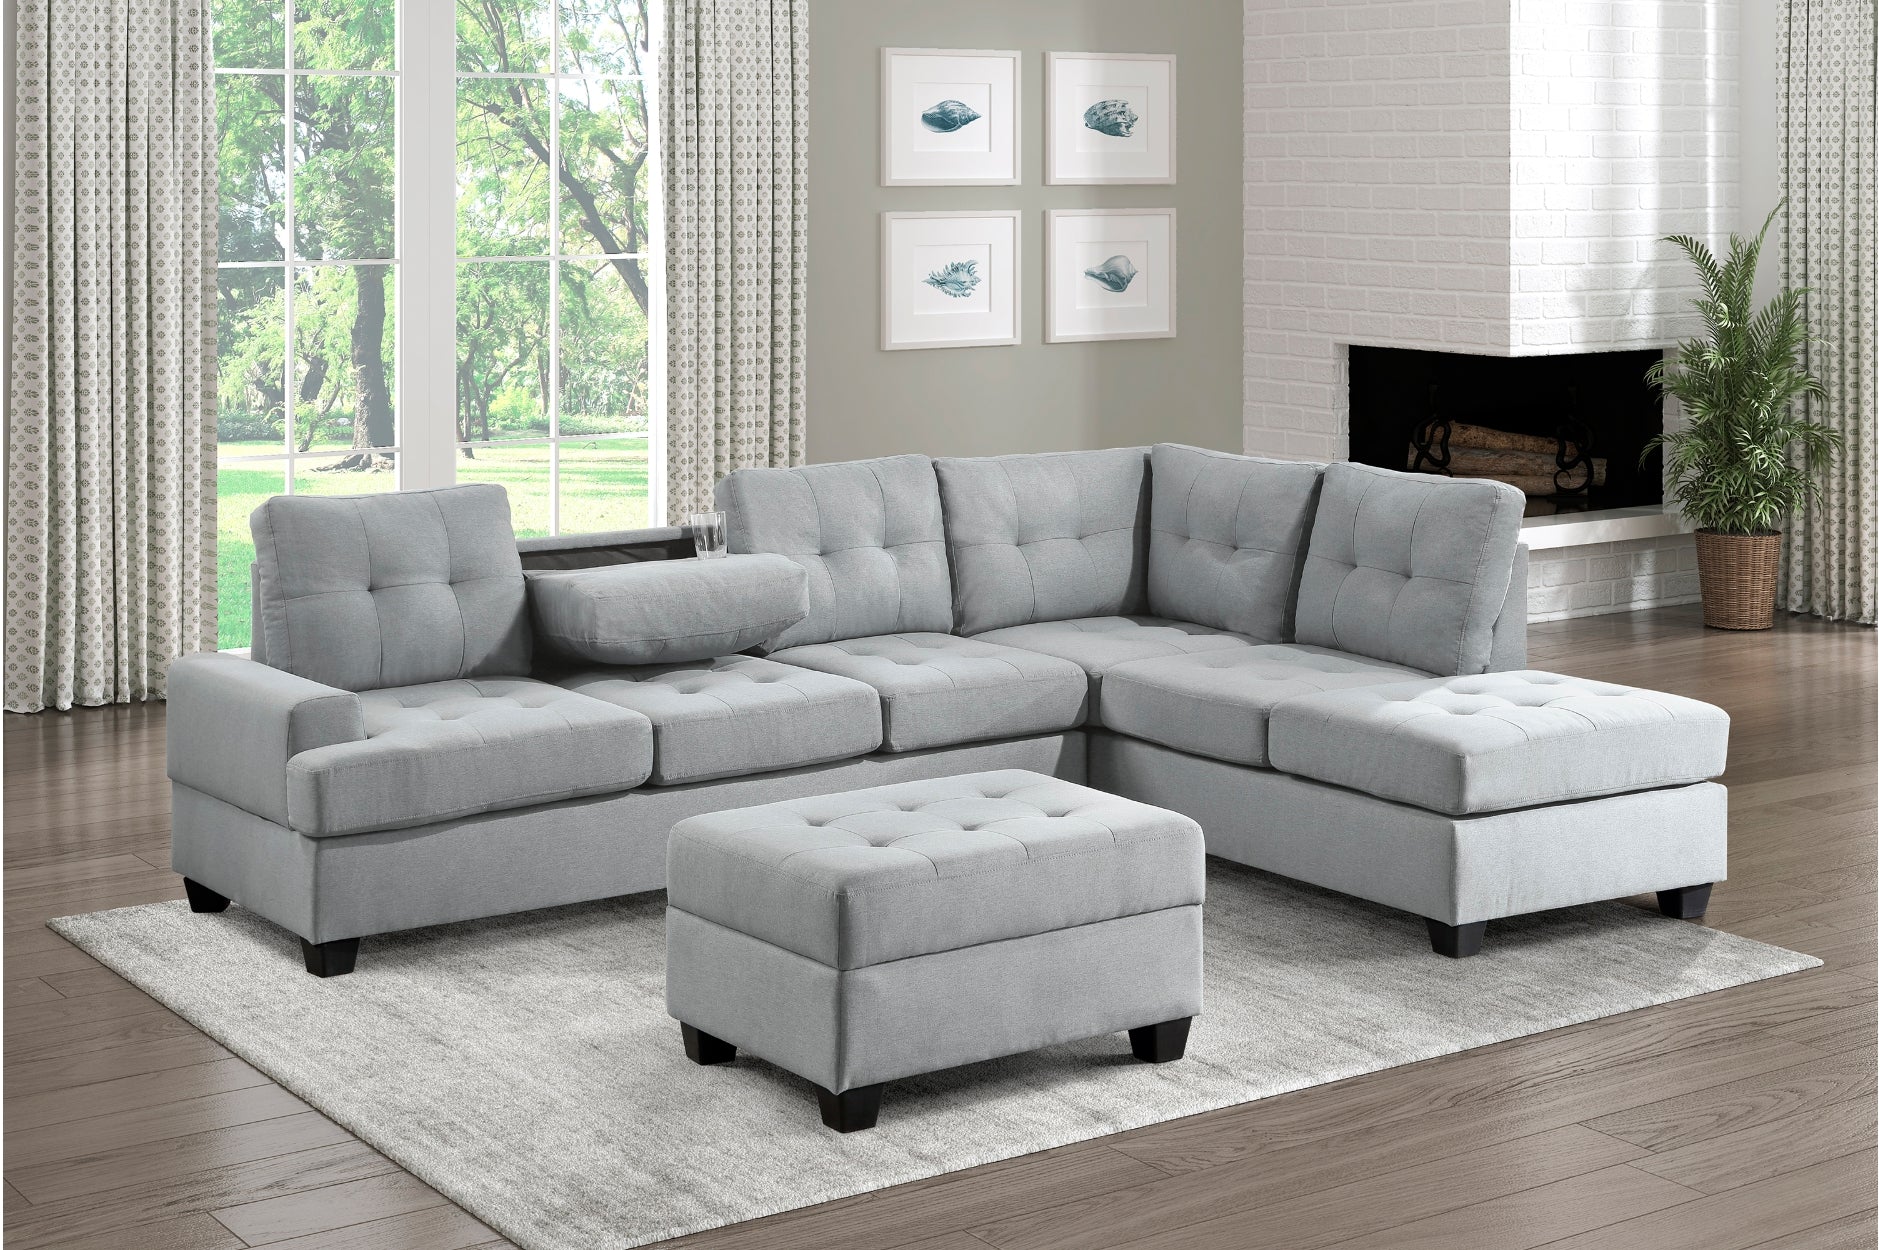 Sectional Sofa Chaise Grey - MZ 9367GY